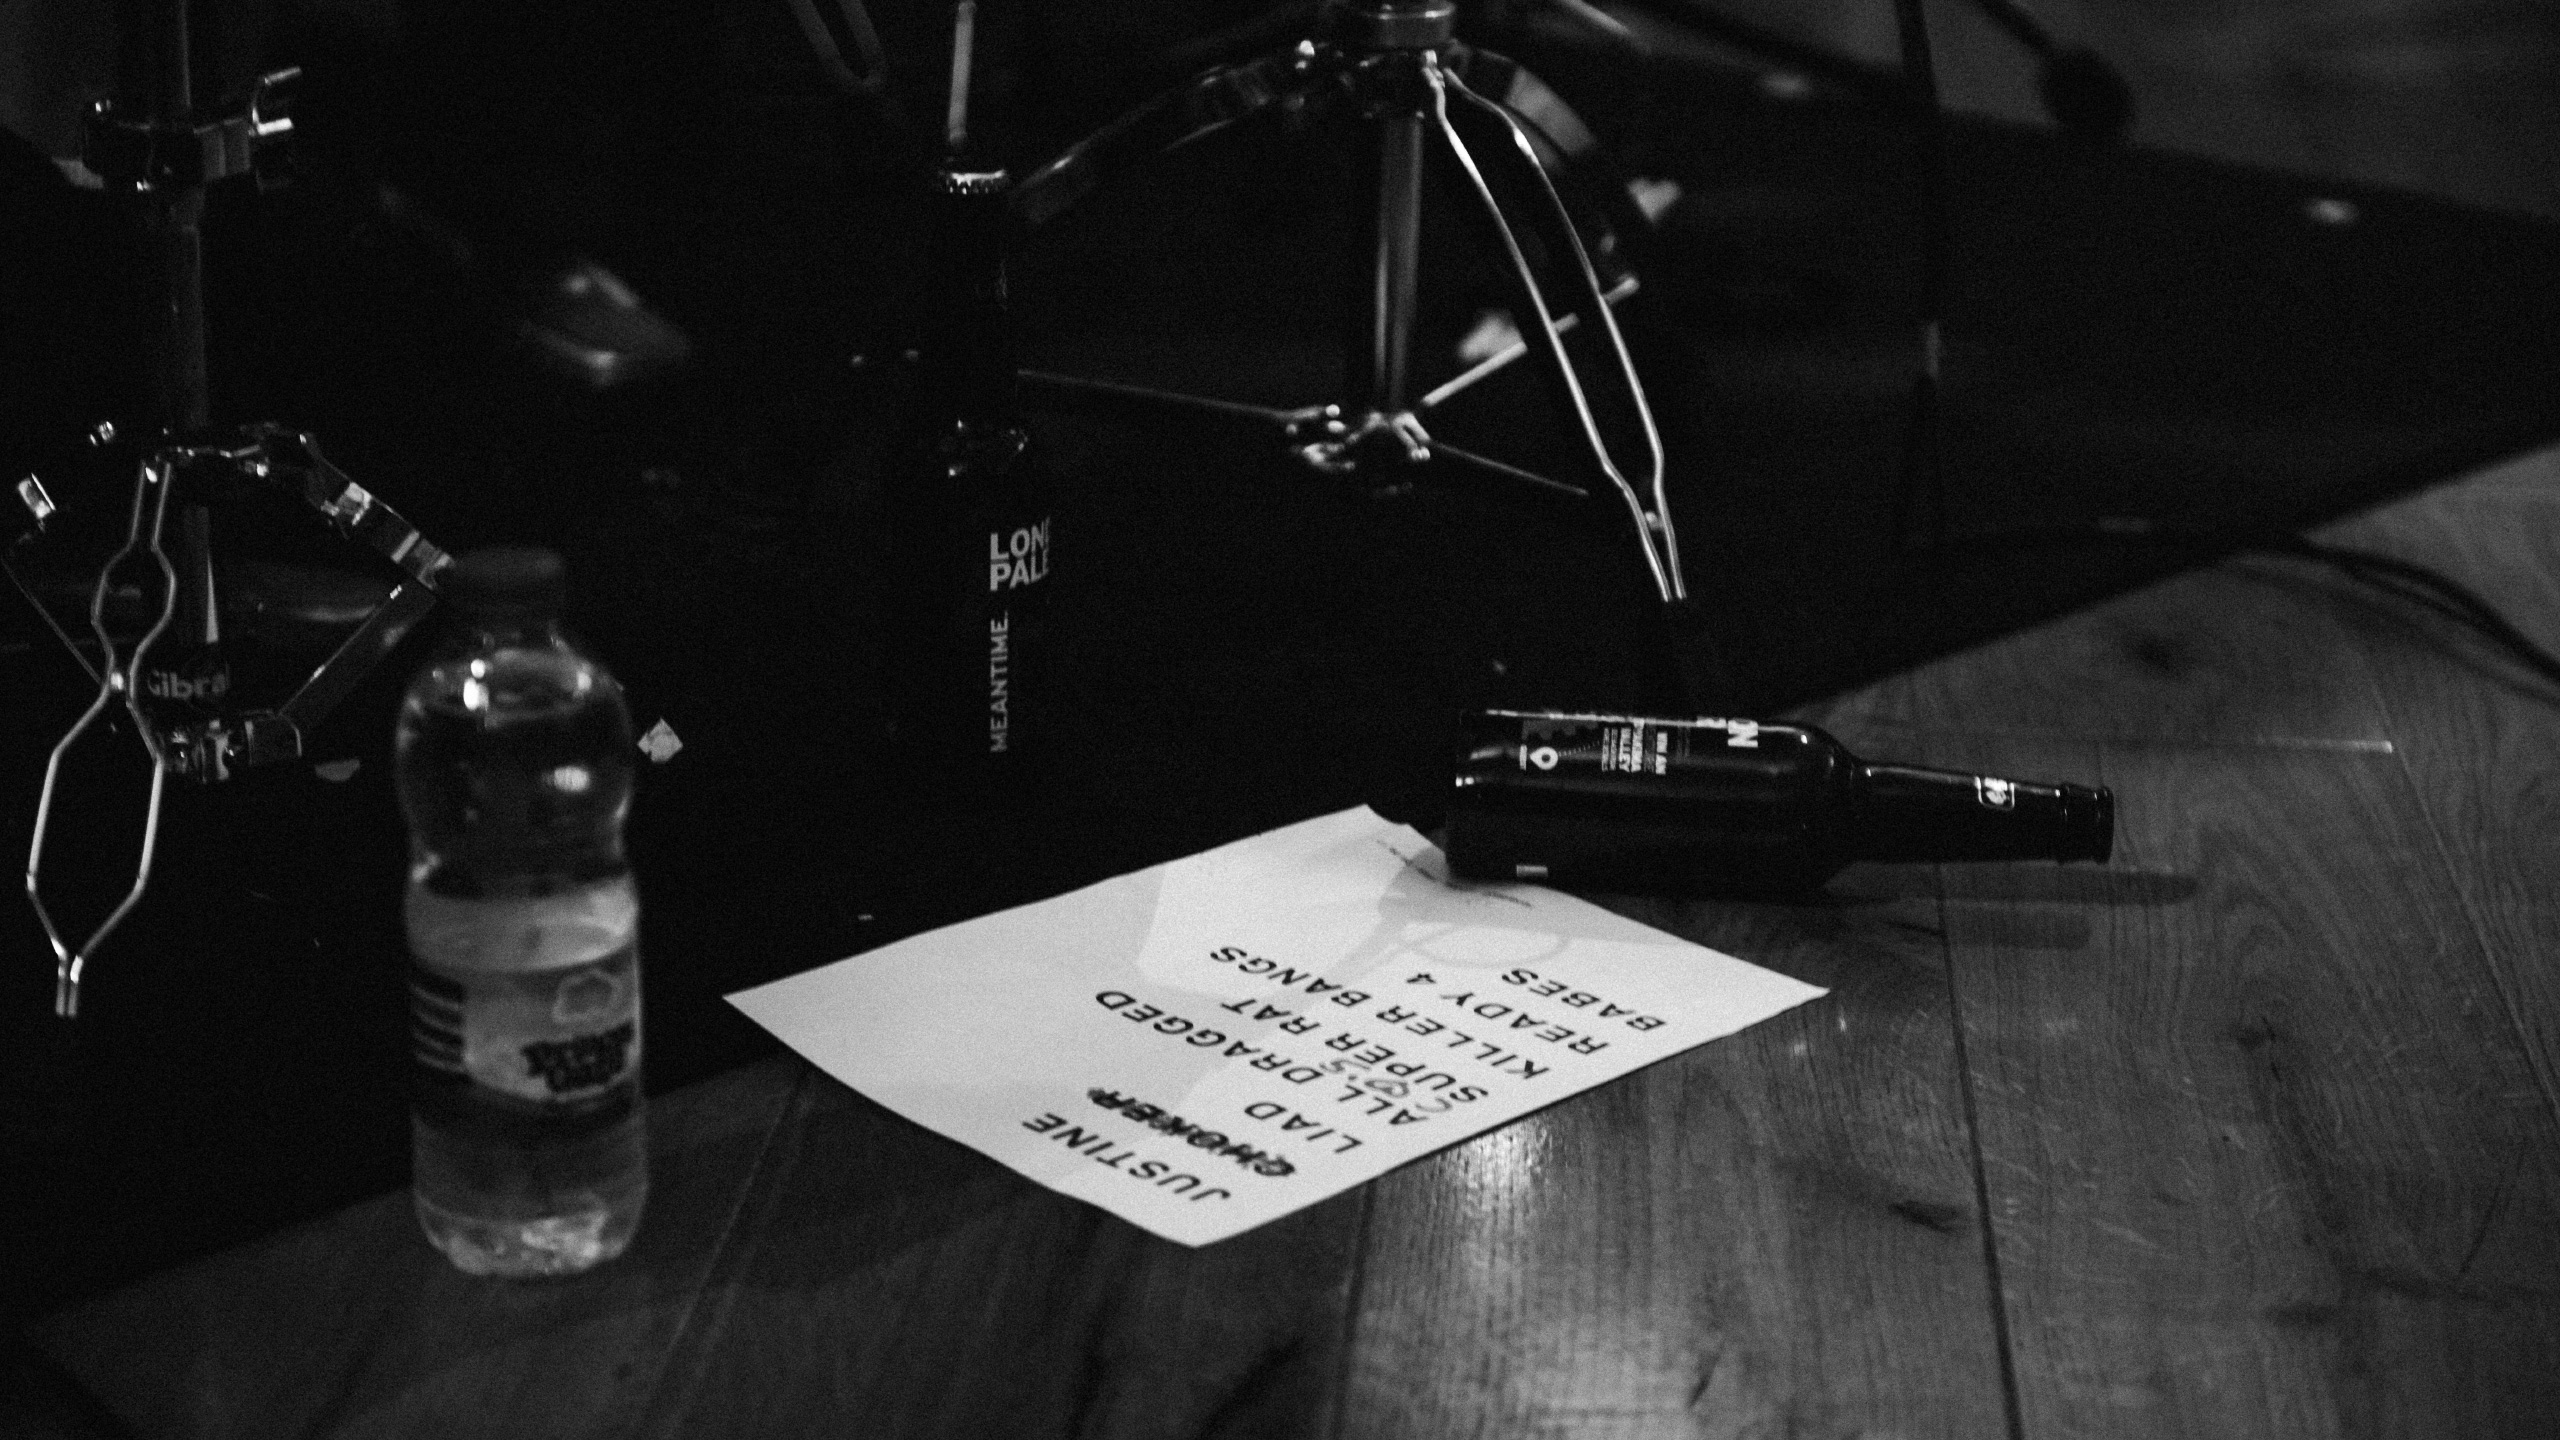 A set list and two bottles on a stage